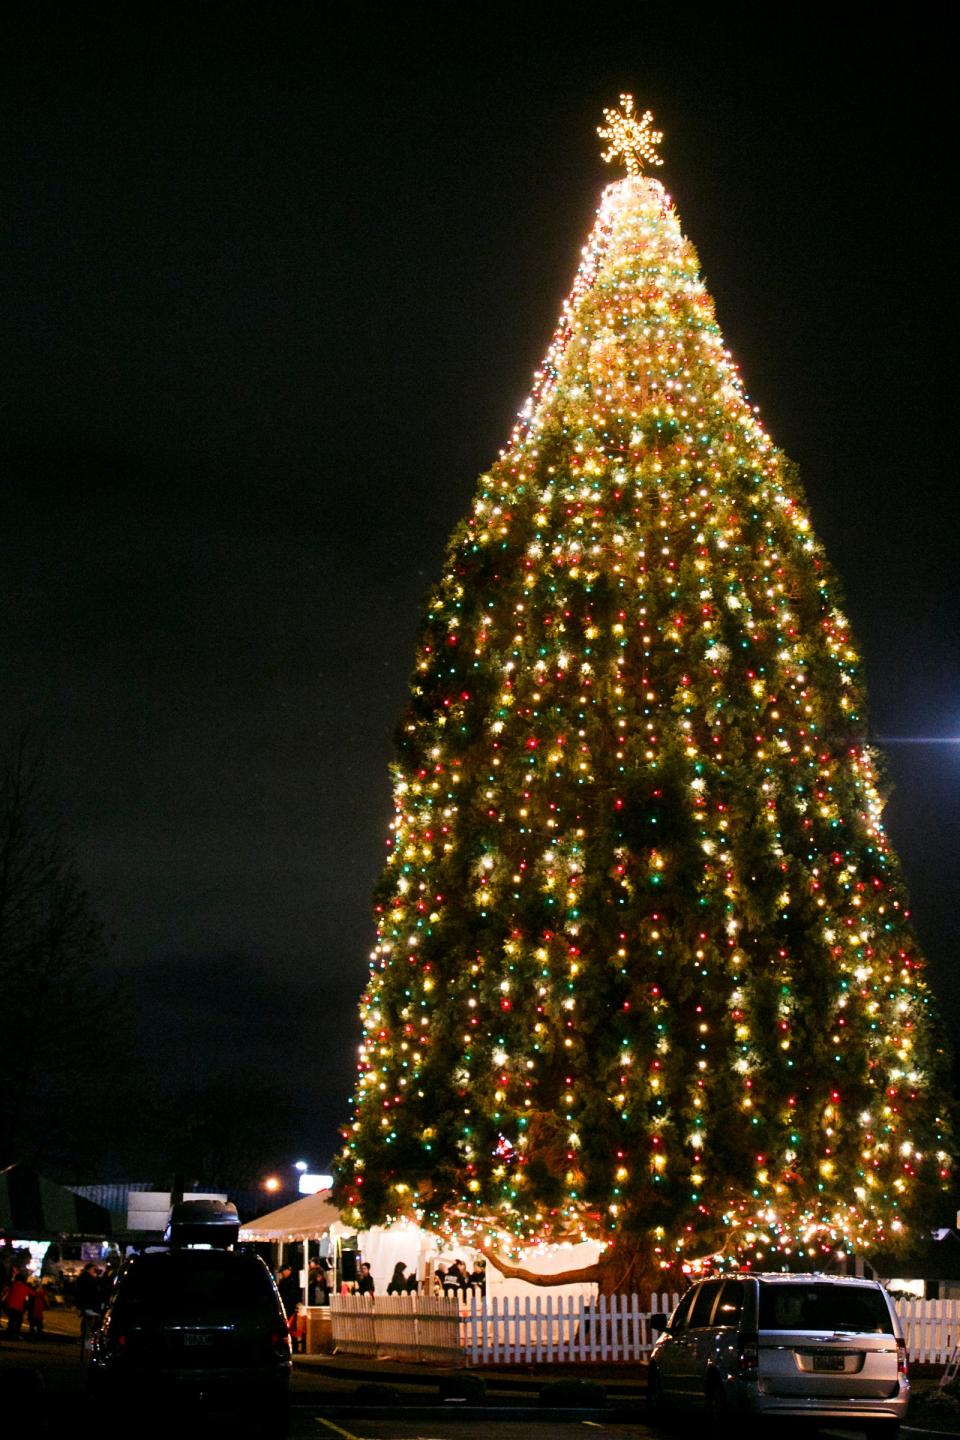 The annual Keizer Holiday Tree Lighting is Dec. 5 at Walery Plaza on the corner of Cherry Avenue and River Road N.